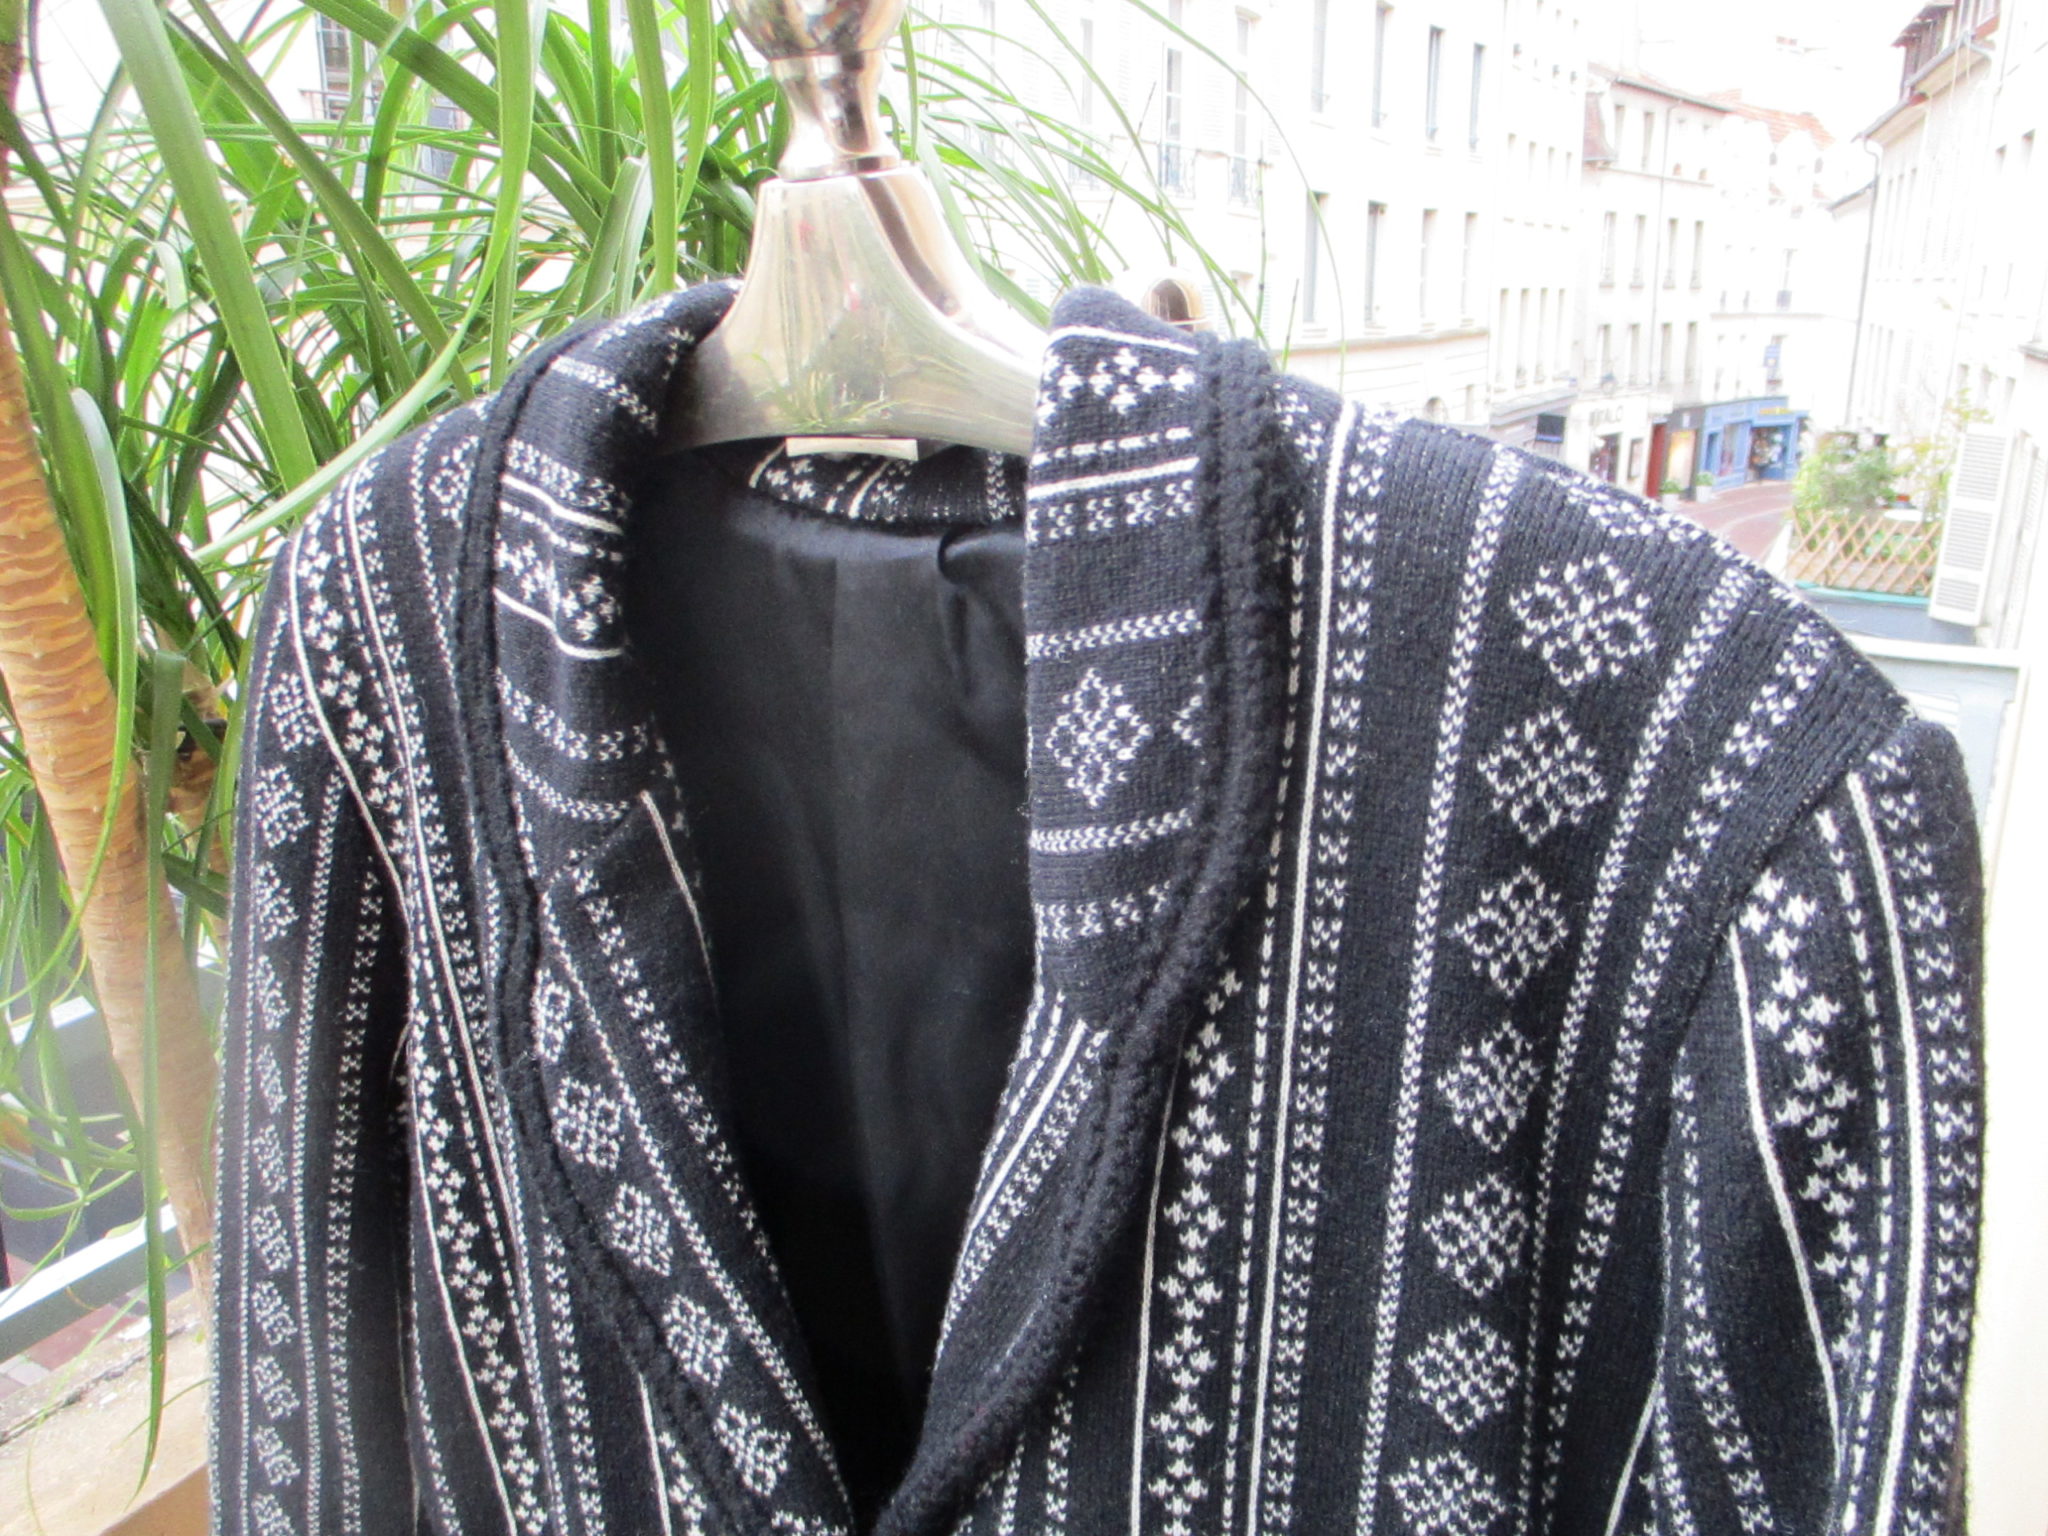 Knit blazer in black and white with coloured flower embroidery by Kenzo